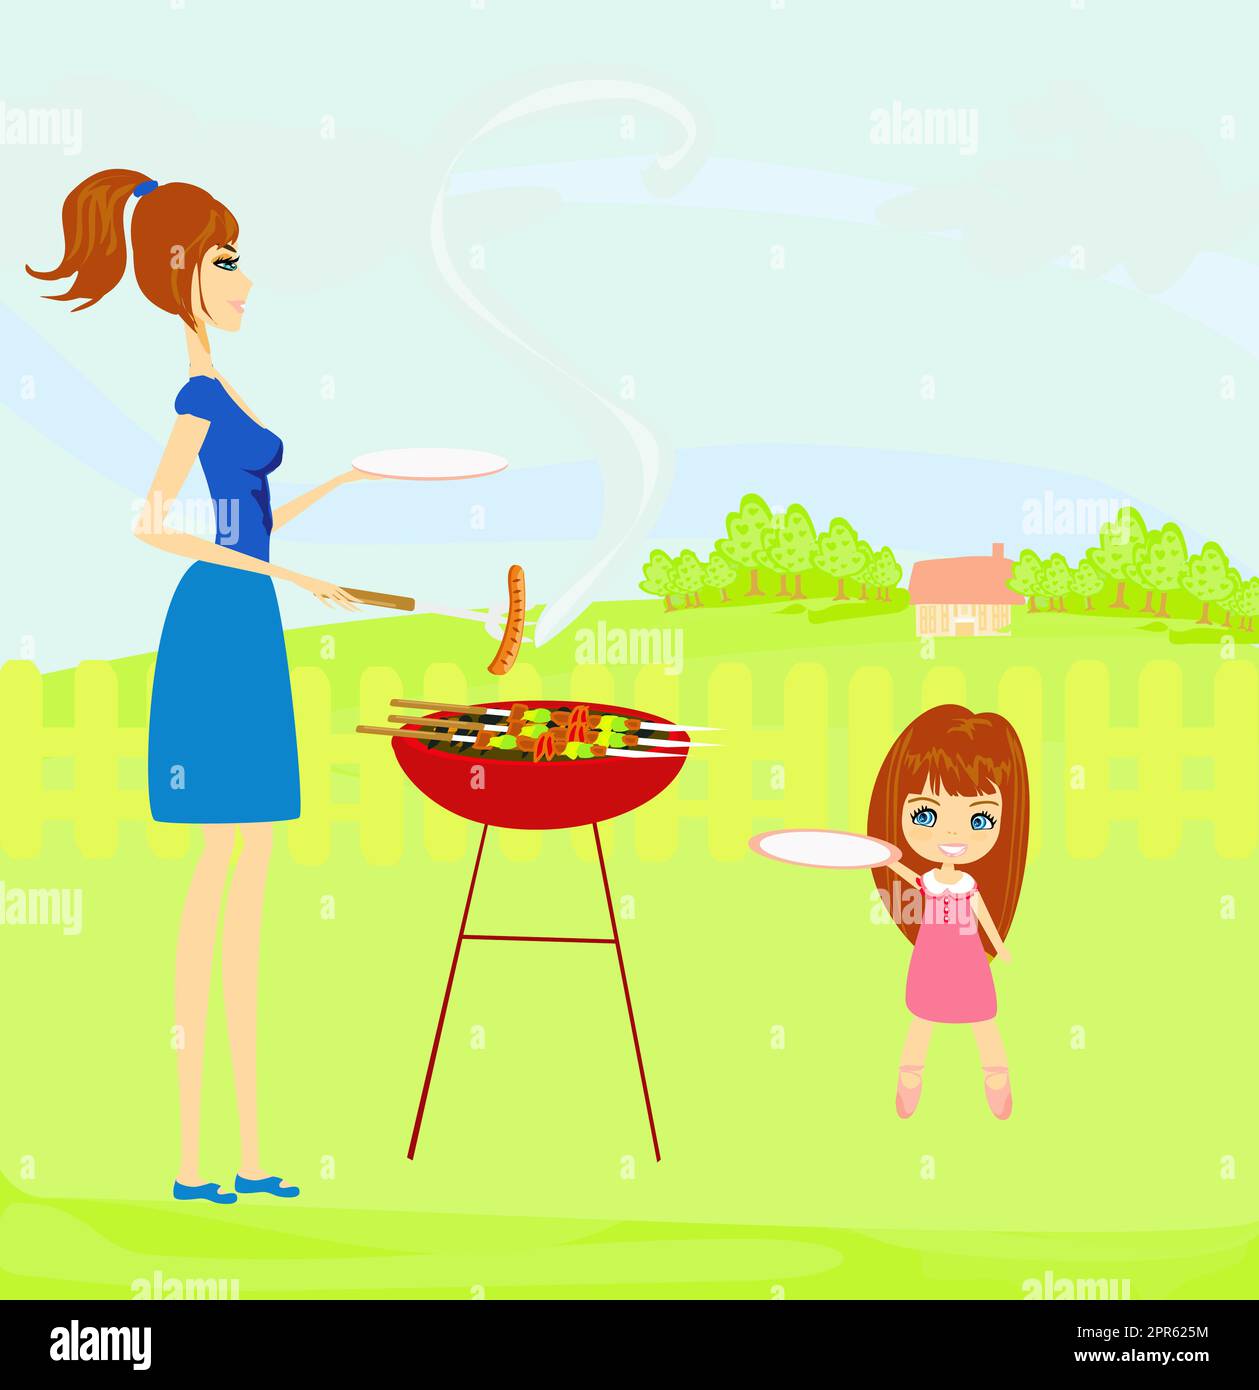 vector illustration of a family having a picnic in a park Stock Photo